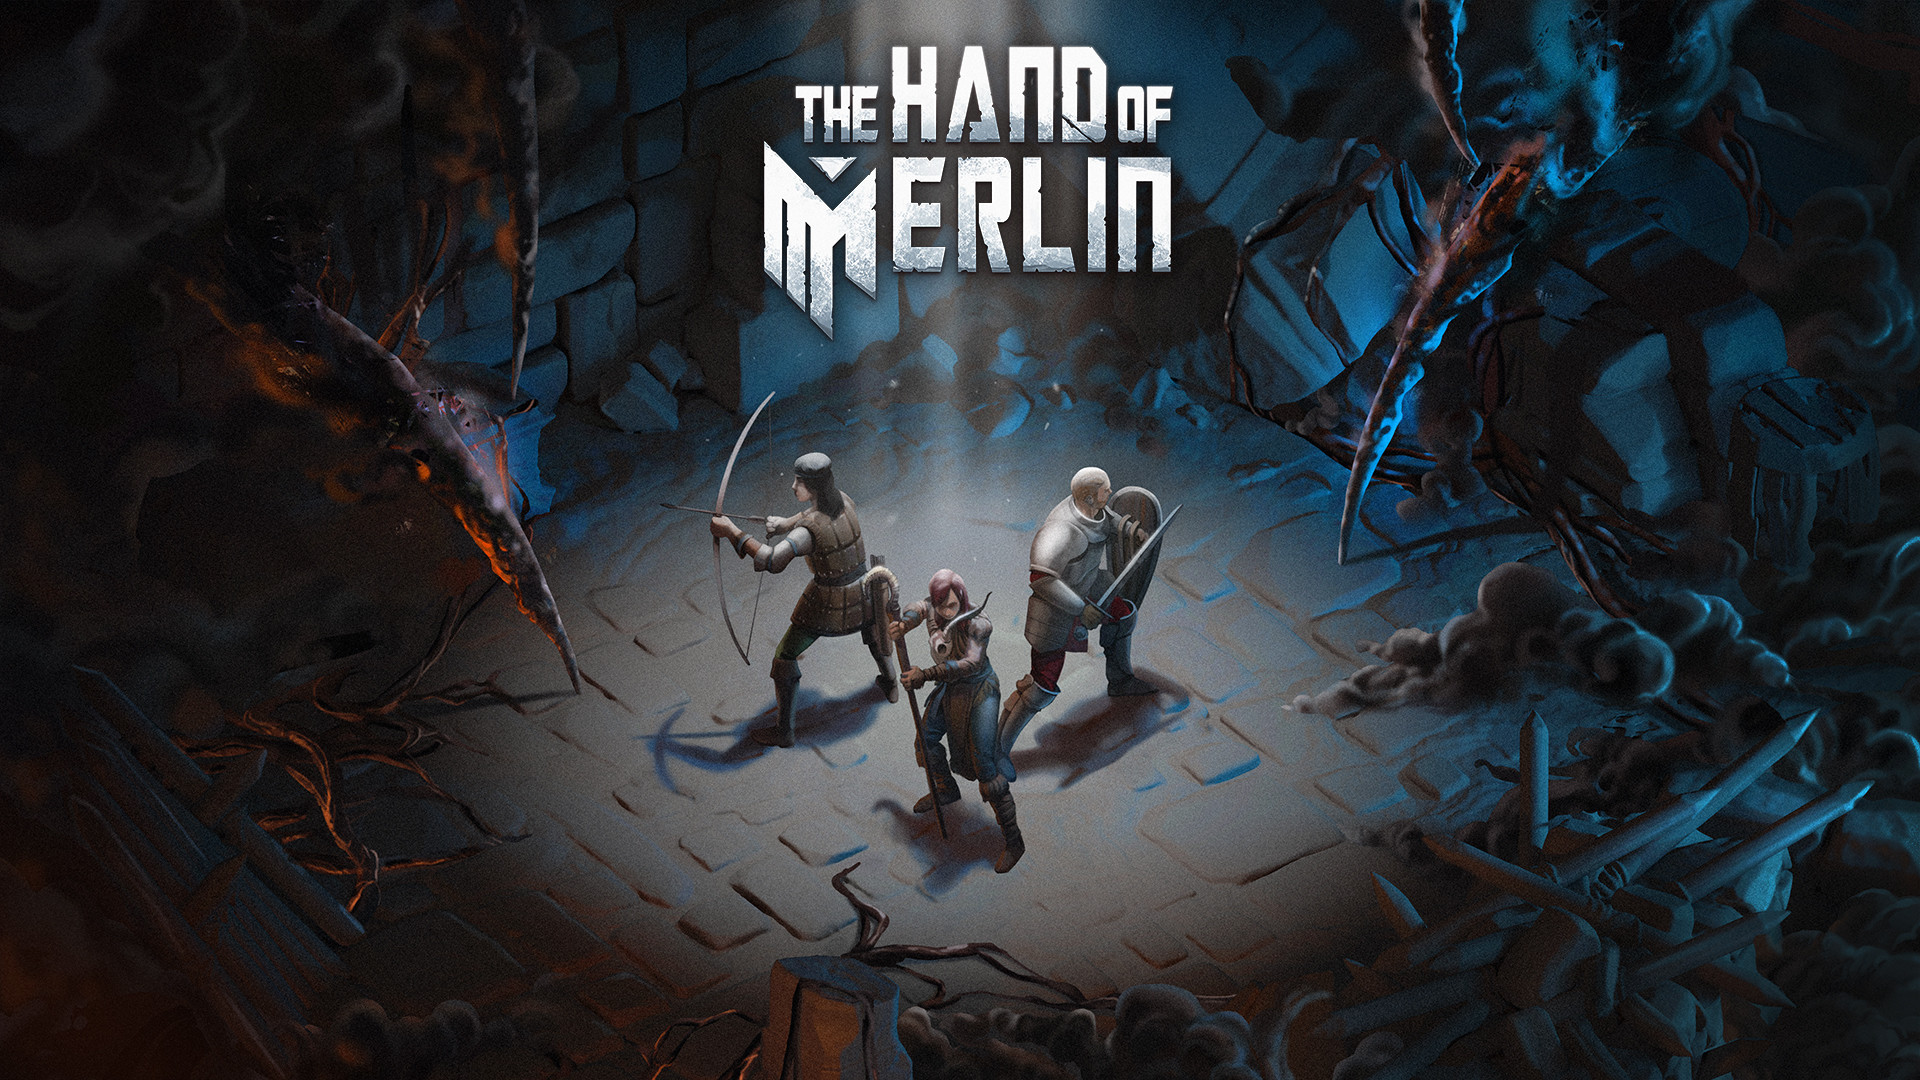 The Hand of Merlin download the new